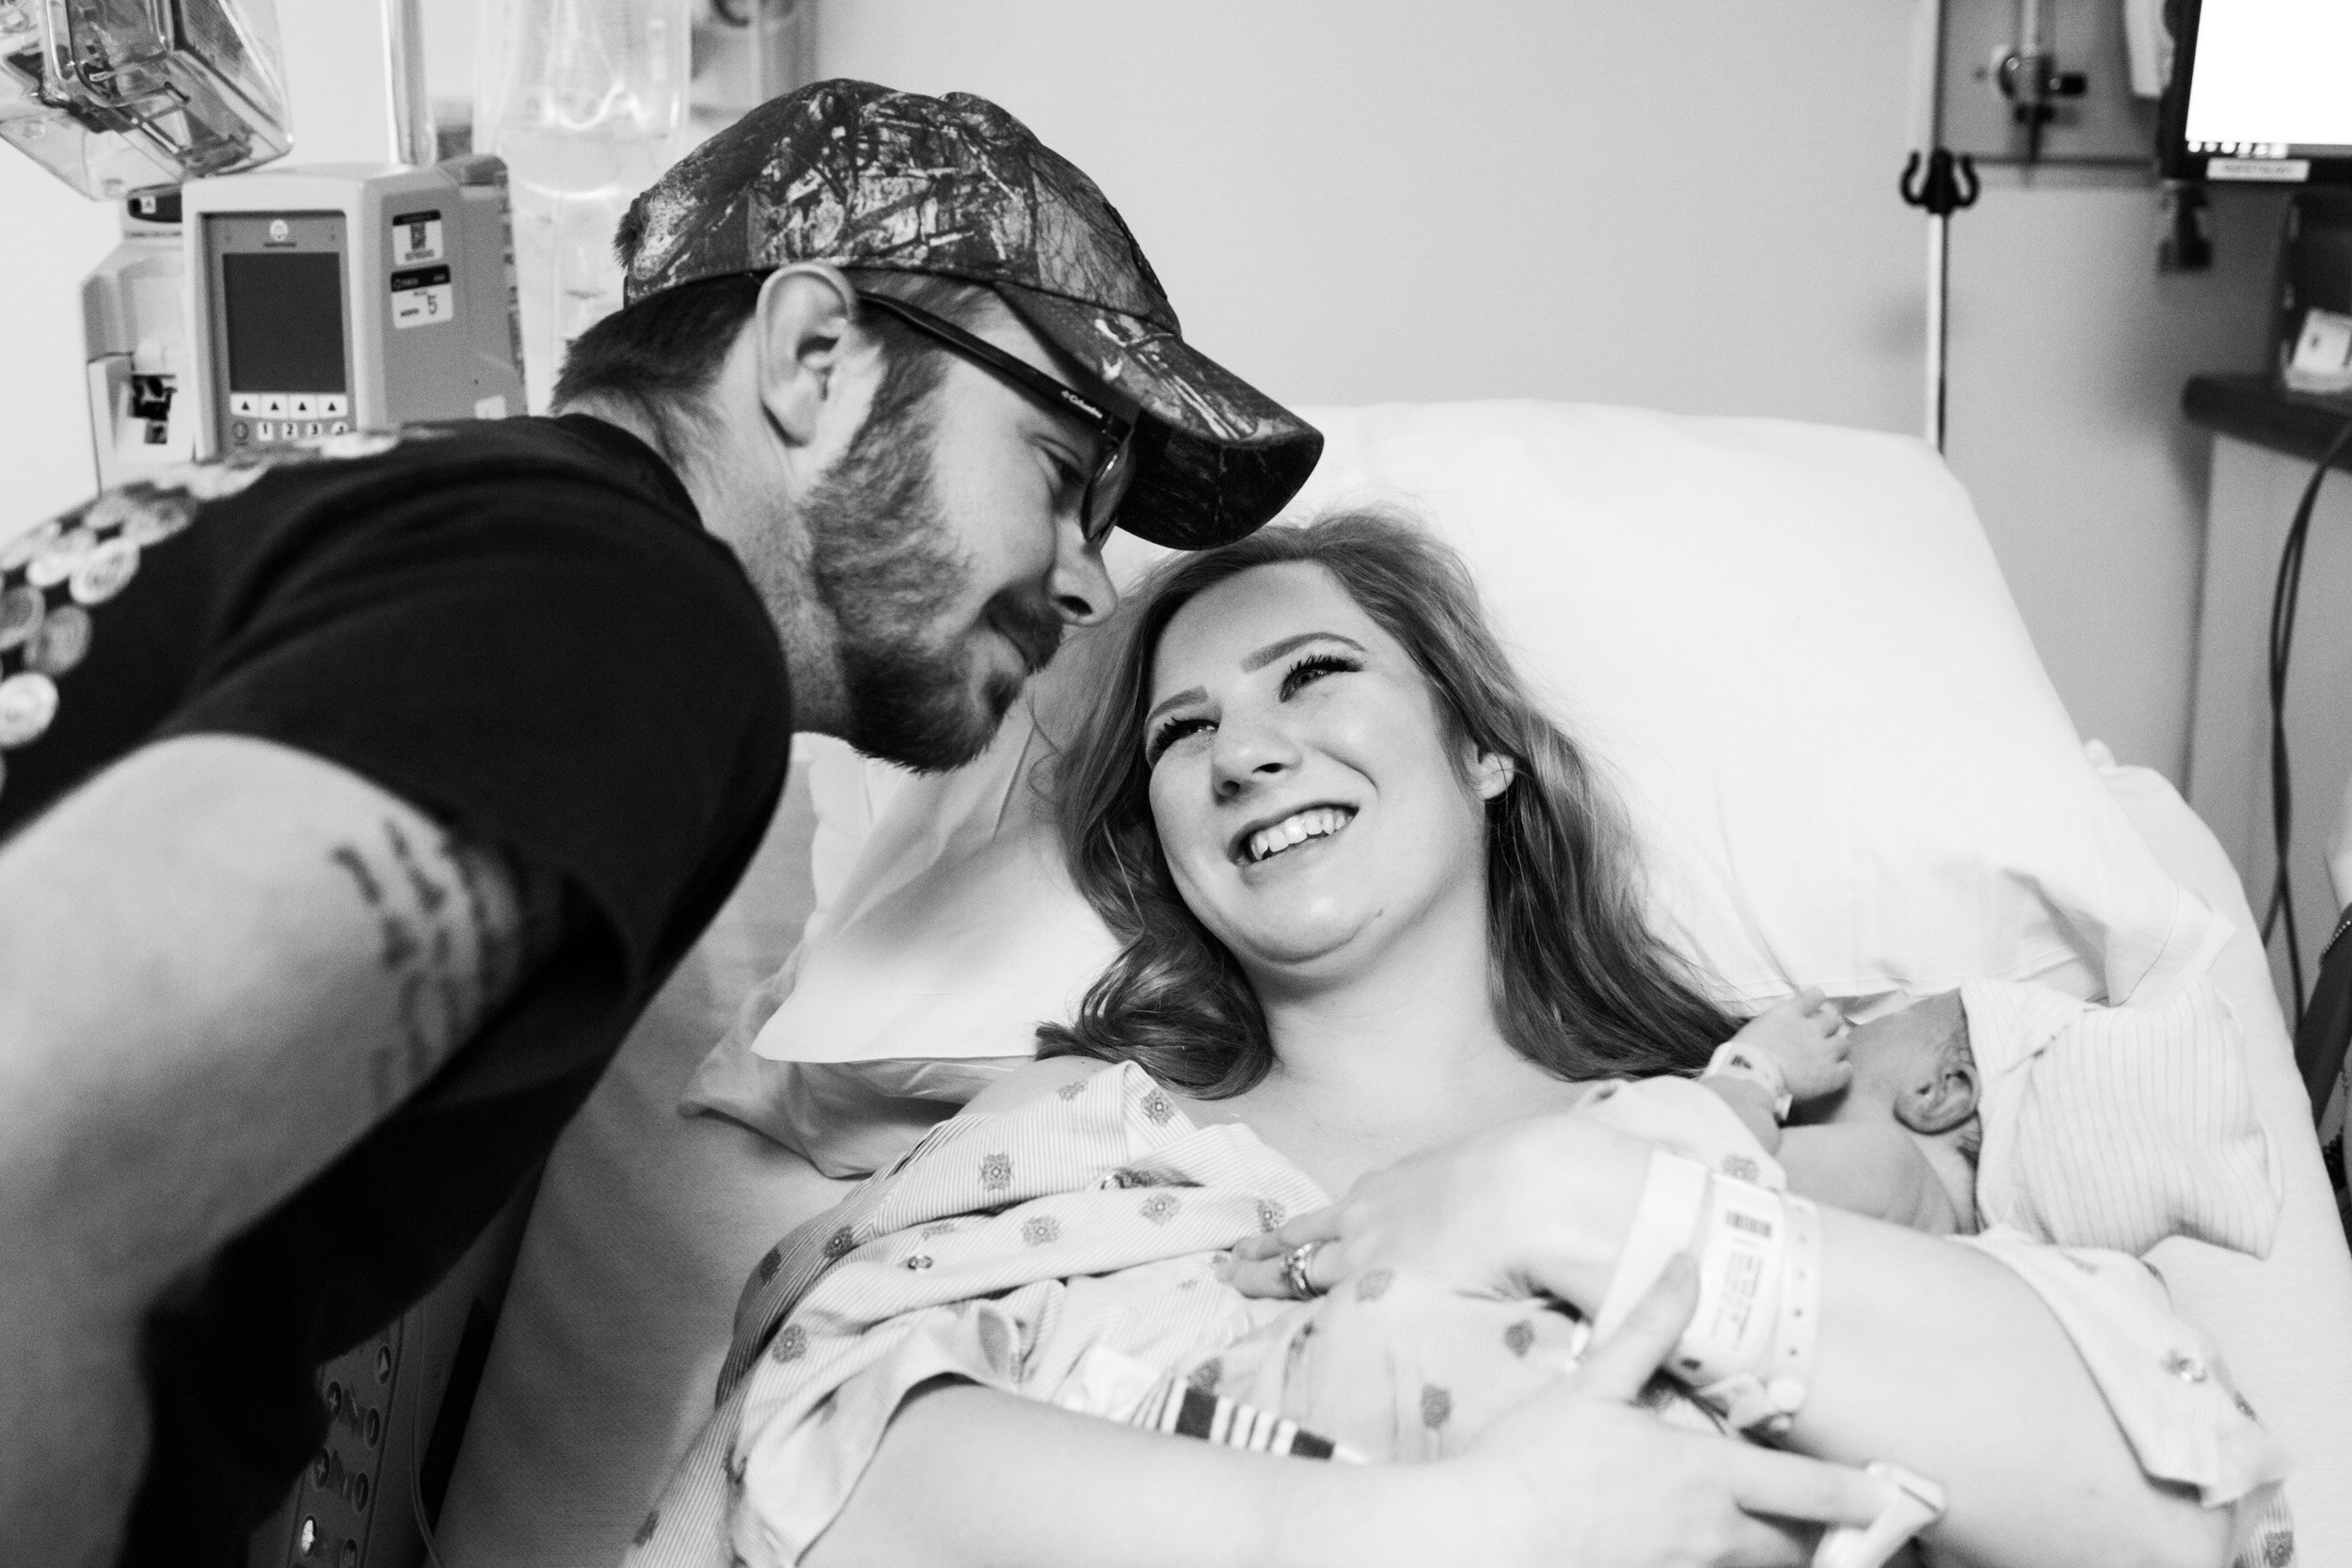 jacksonville mom smiling at her husband after baby was born